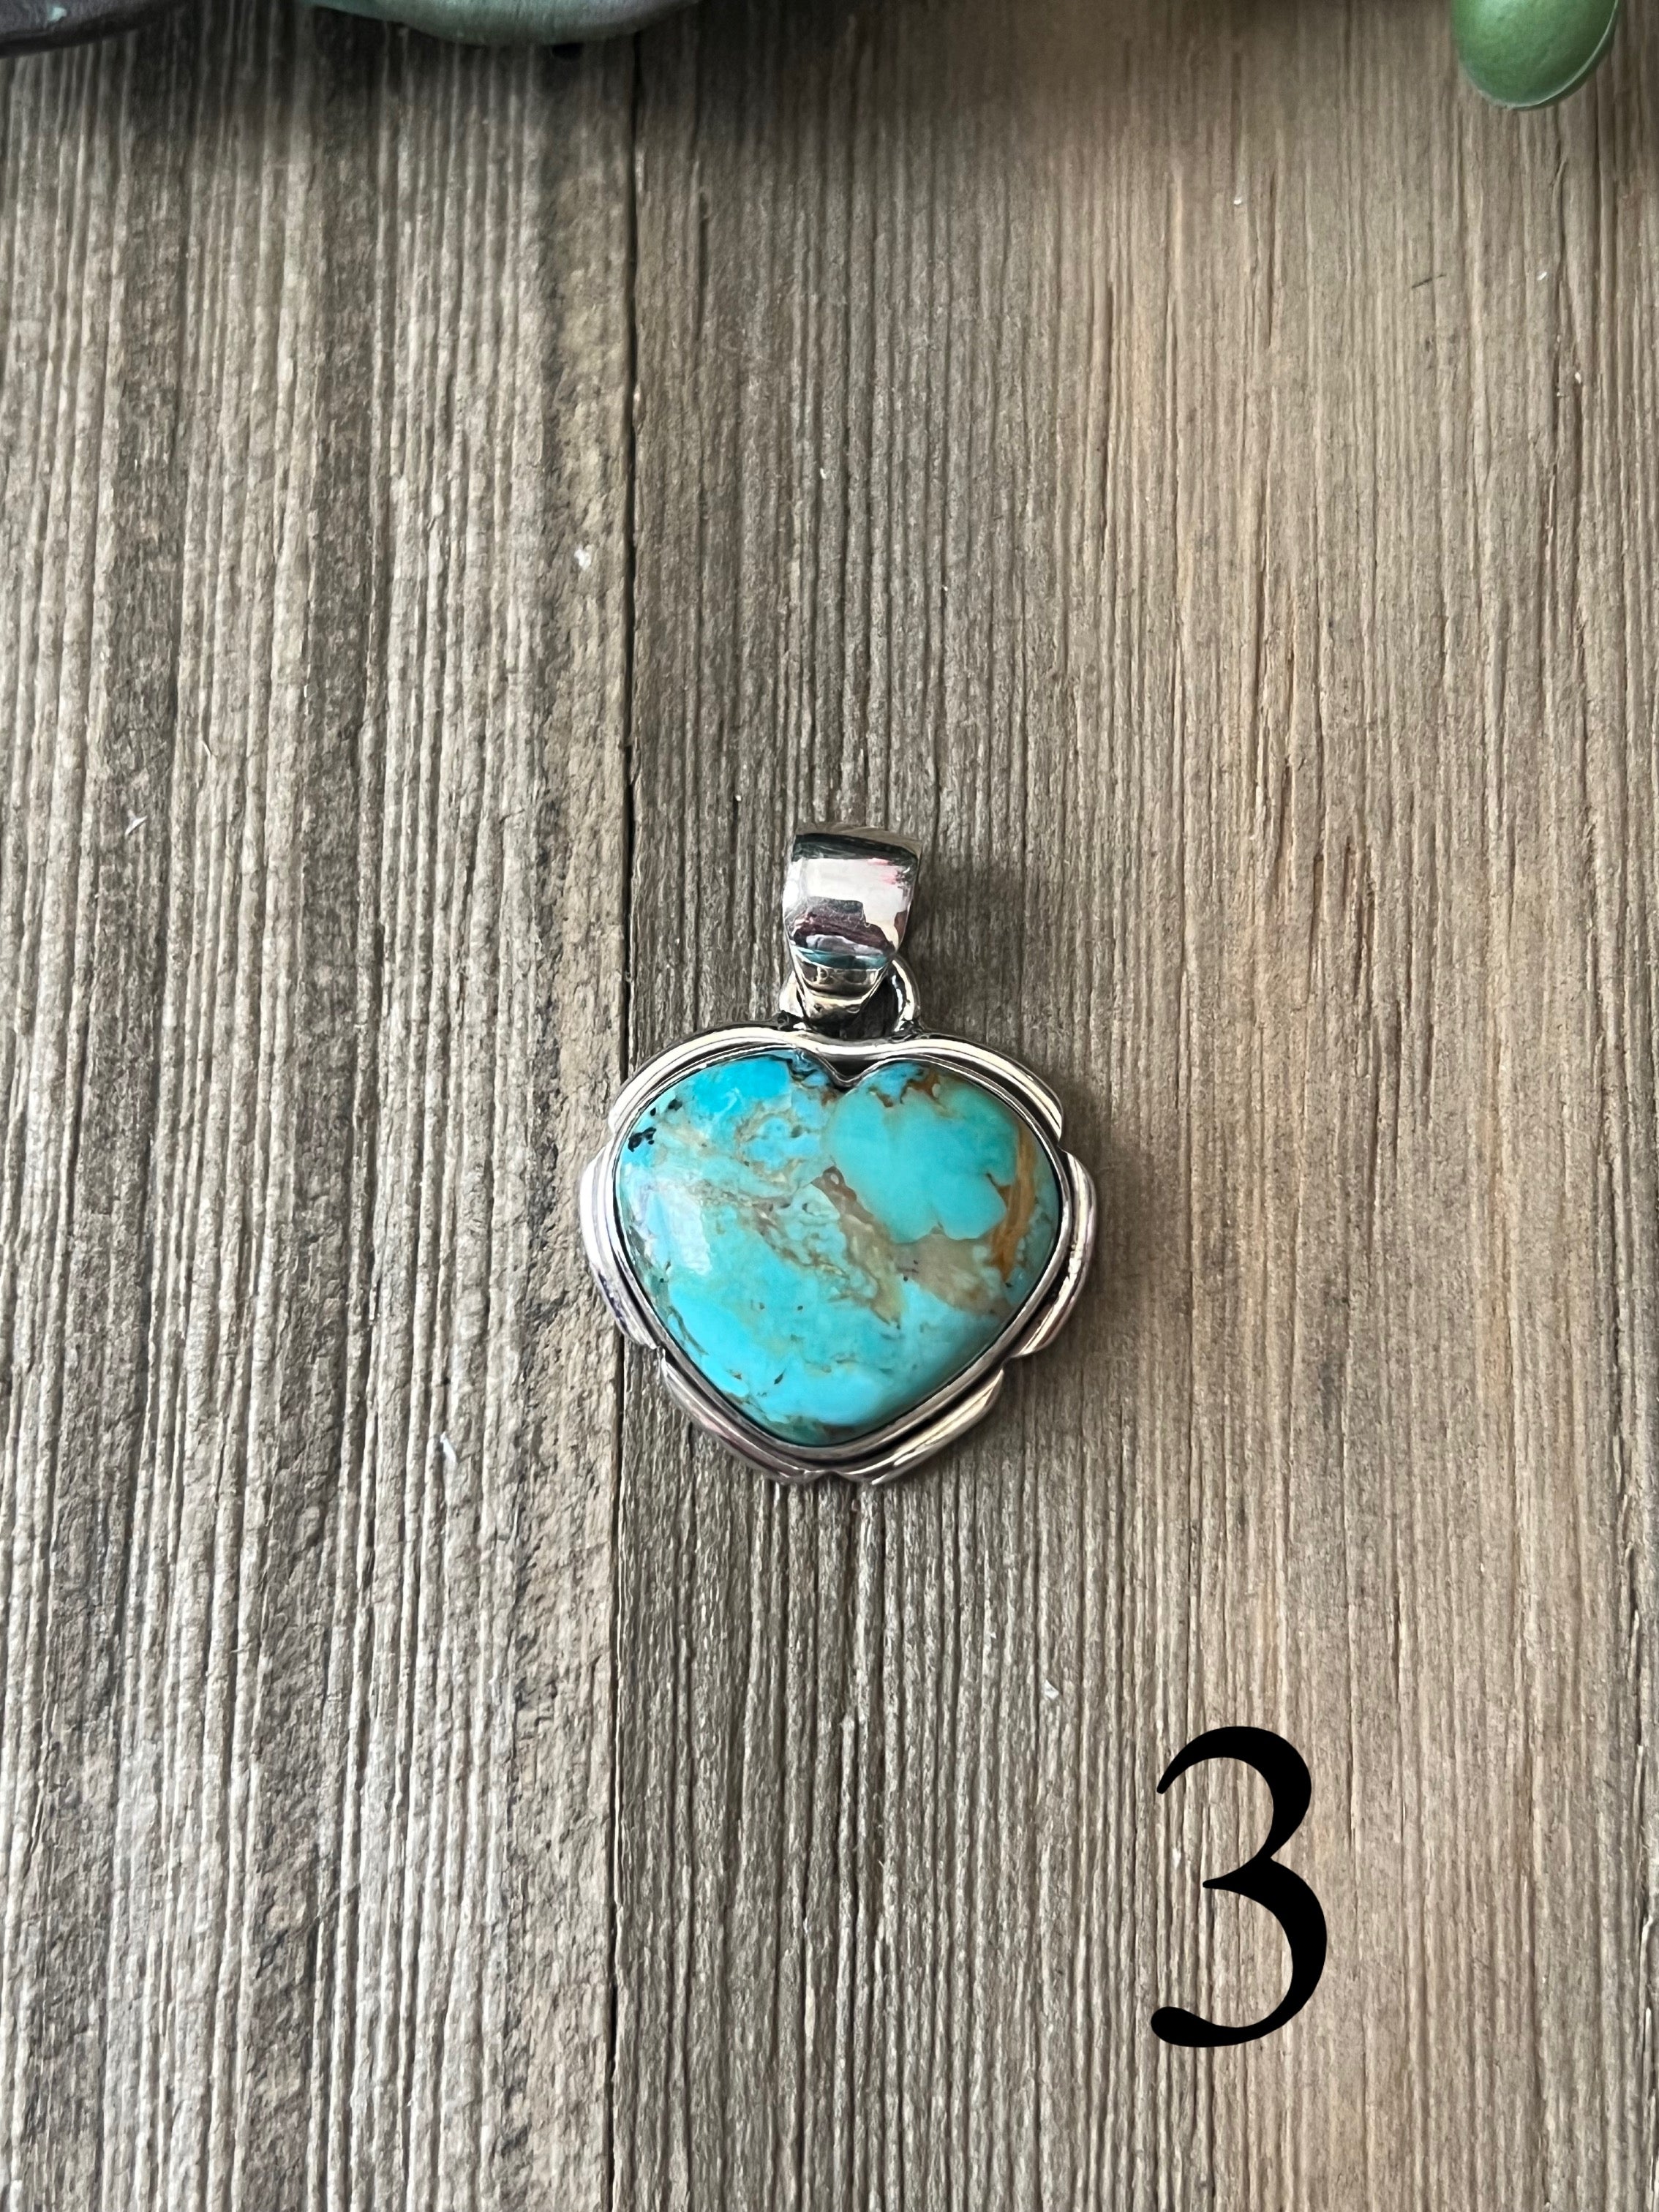 Southwest Made Turquoise & Sterling Silver Heart Pendant